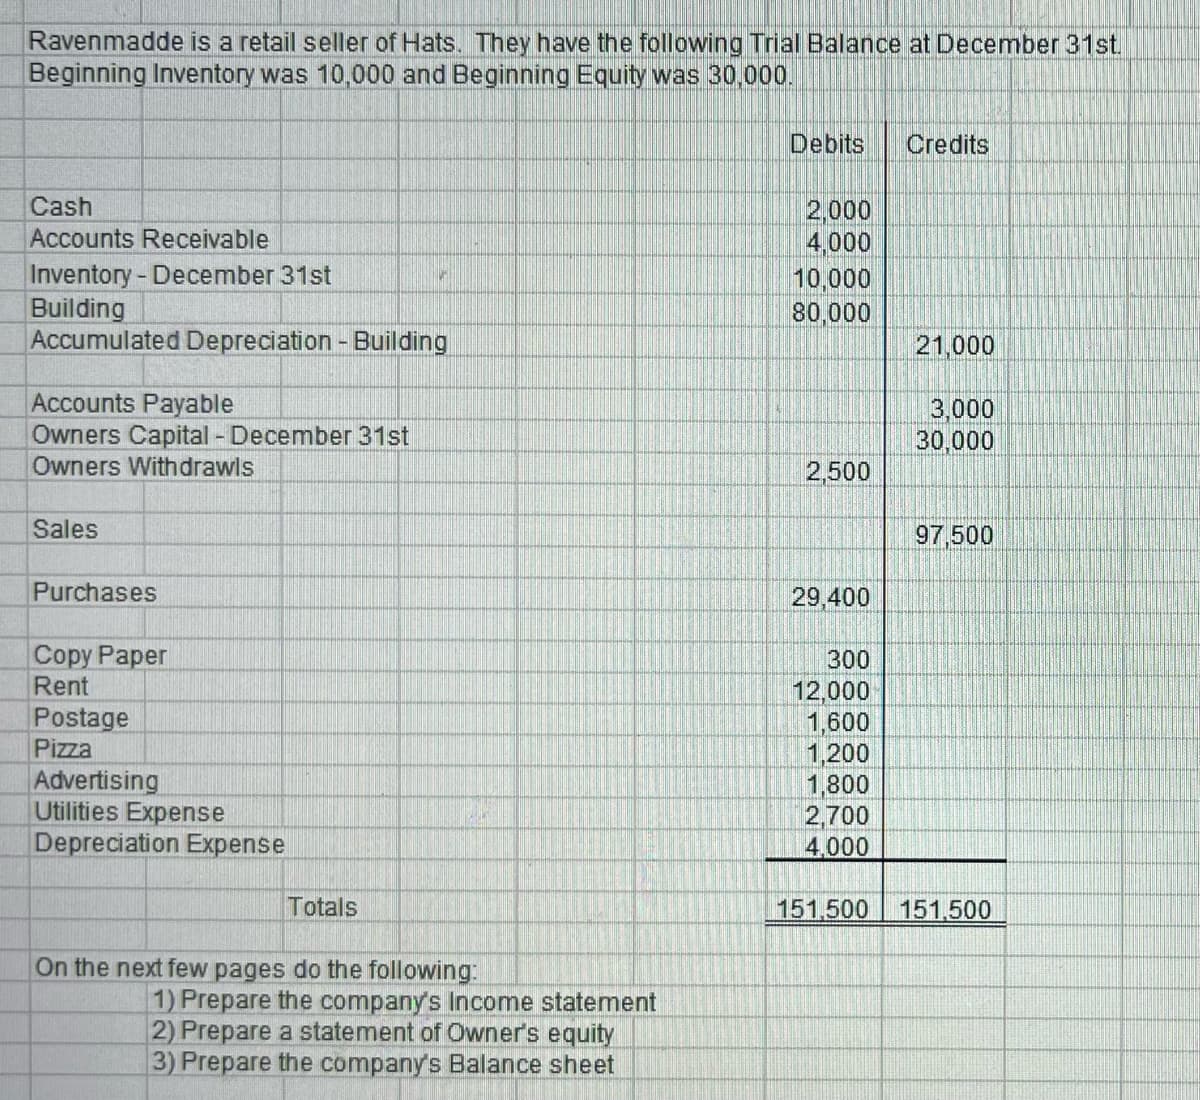 Ravenmadde is a retail seller of Hats. They have the following Trial Balance at December 31st.
Beginning Inventory was 10,000 and Beginning Equity was 30,000.
Cash
Accounts Receivable
Inventory - December 31st
Building
Accumulated Depreciation - Building
Accounts Payable
Owners Capital - December 31st
Owners Withdrawls
Sales
Purchases
Copy Paper
Rent
Postage
Pizza
Advertising
Utilities Expense
Depreciation Expense
Totals
V
On the next few pages do the following:
1) Prepare the company's Income statement
2) Prepare a statement of Owner's equity
3) Prepare the company's Balance sheet
Debits
2,000
4,000
10,000
80,000
2,500
29,400
300
12,000
1,600
1,200
1,800
2,700
4,000
151.500
Credits
21,000
3,000
30,000
97,500
151,500